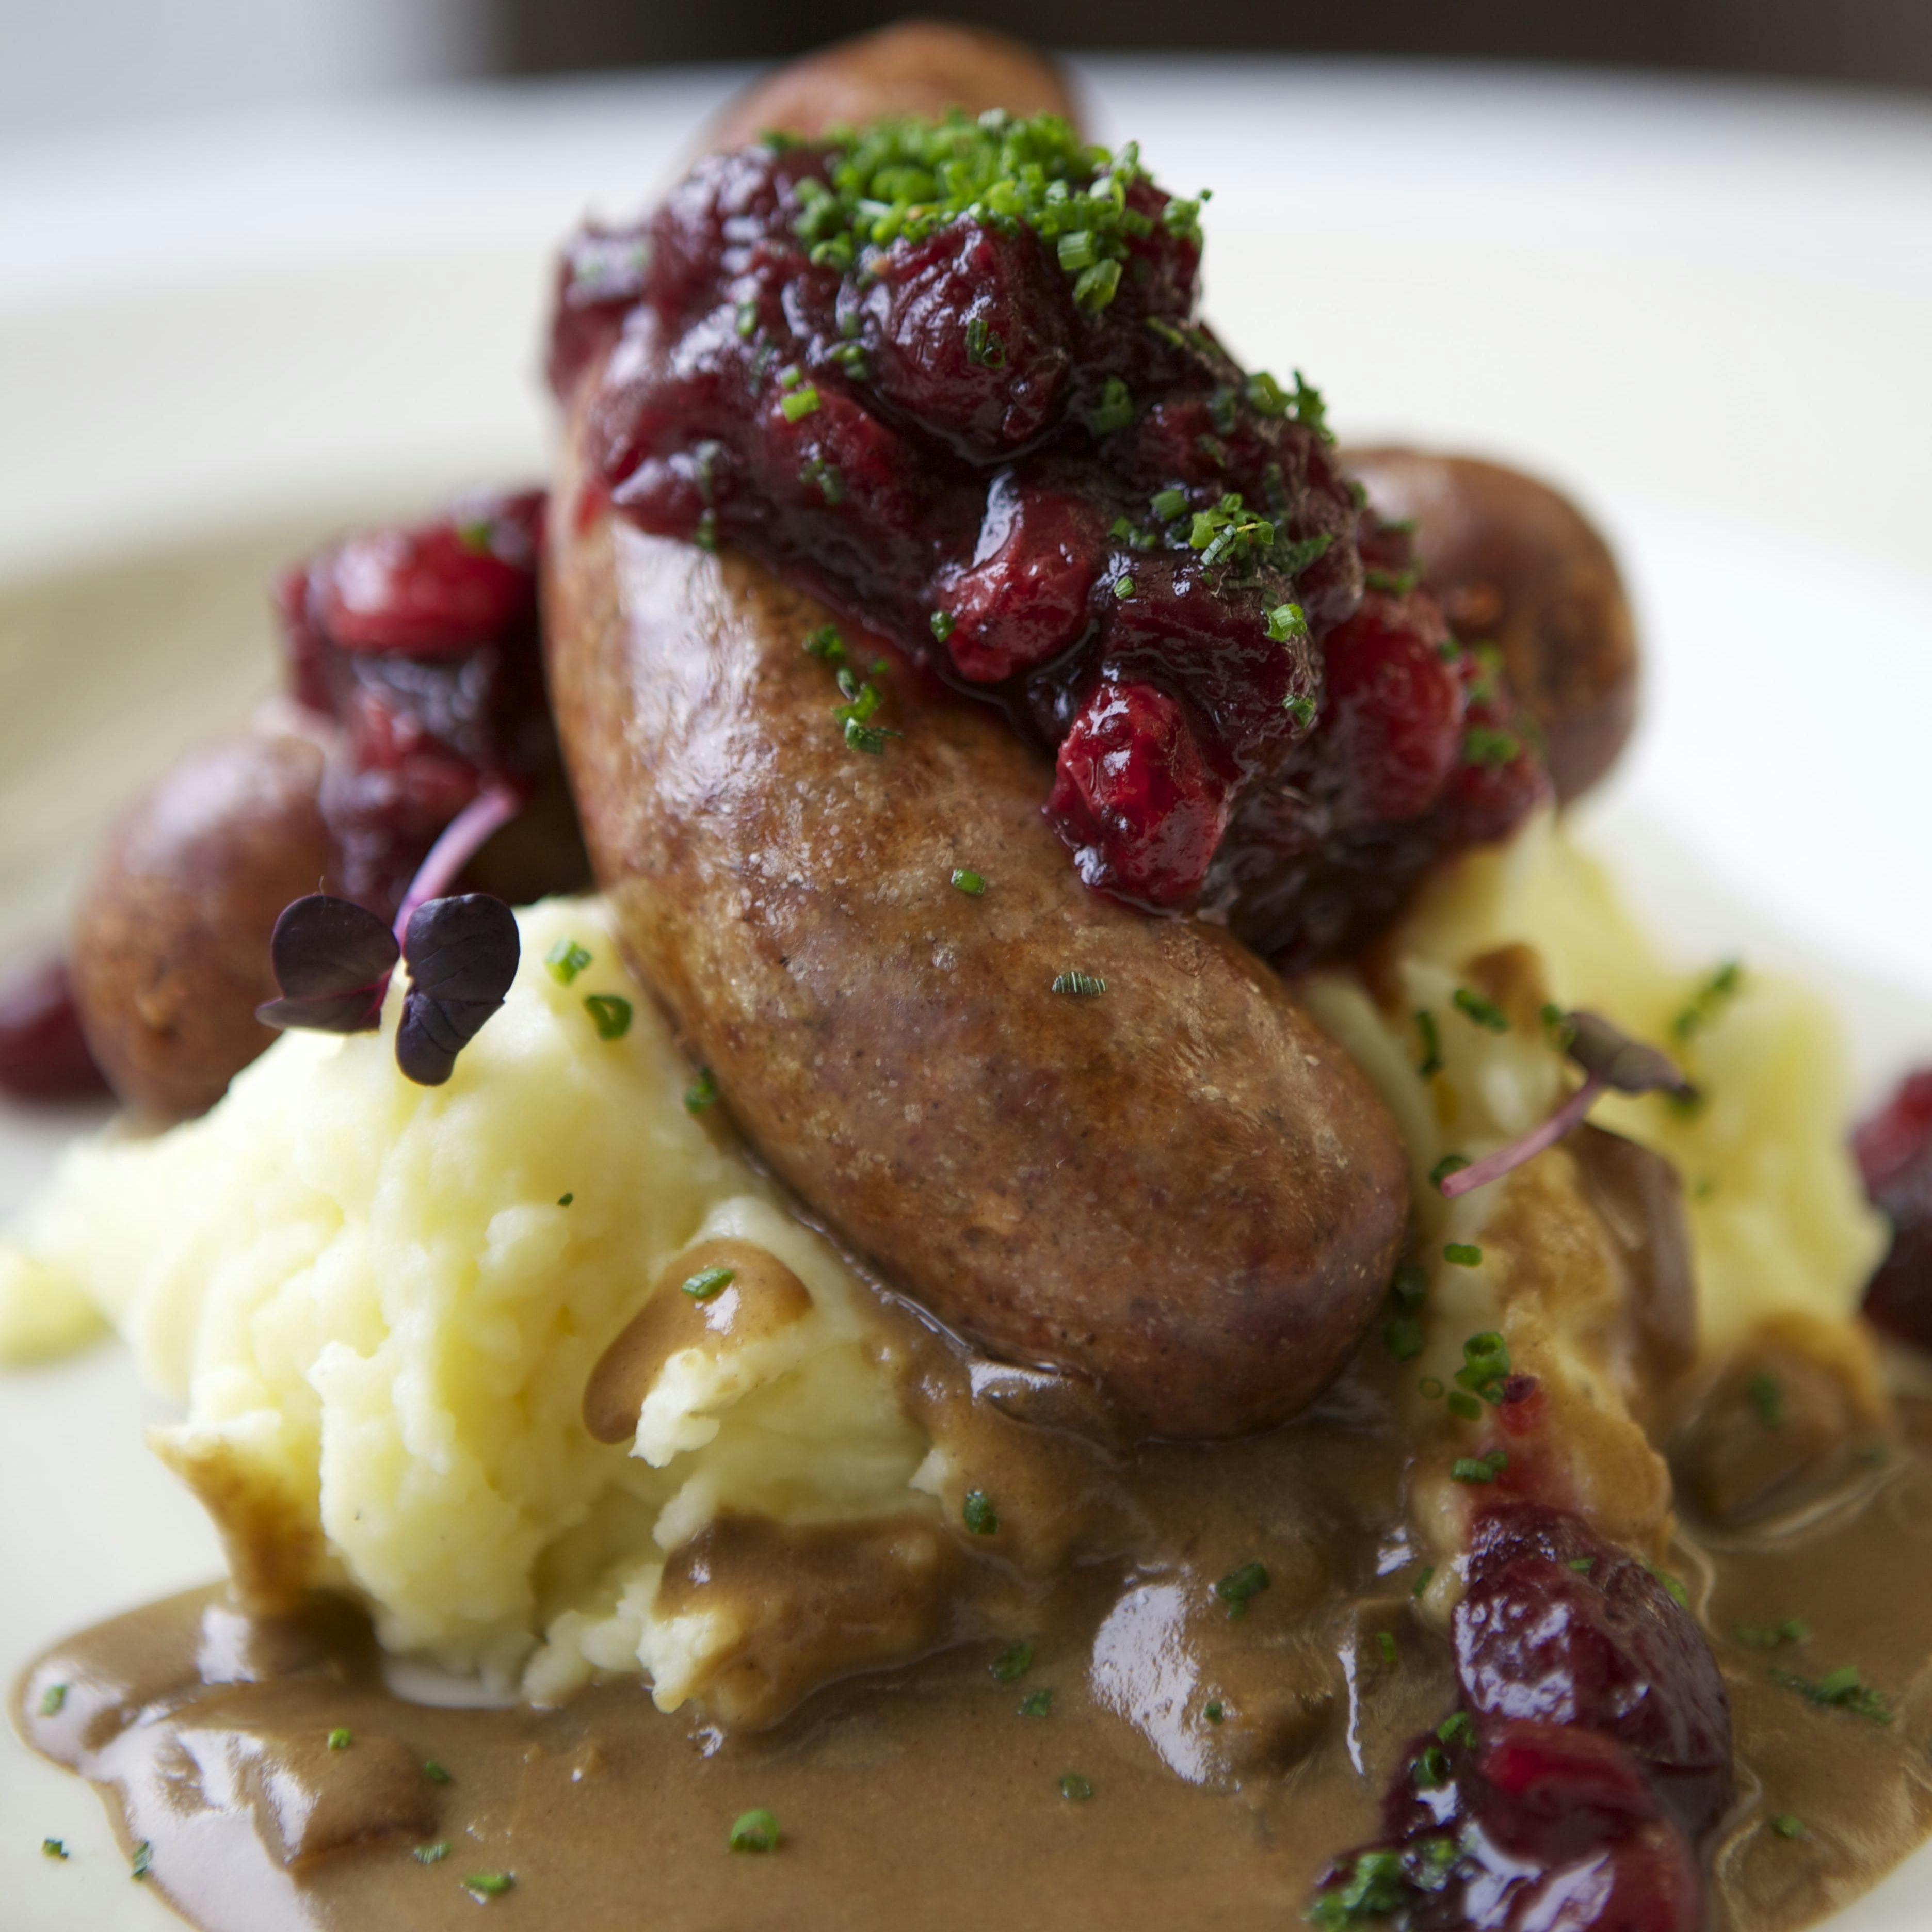 Guinness sausages and mashed potato